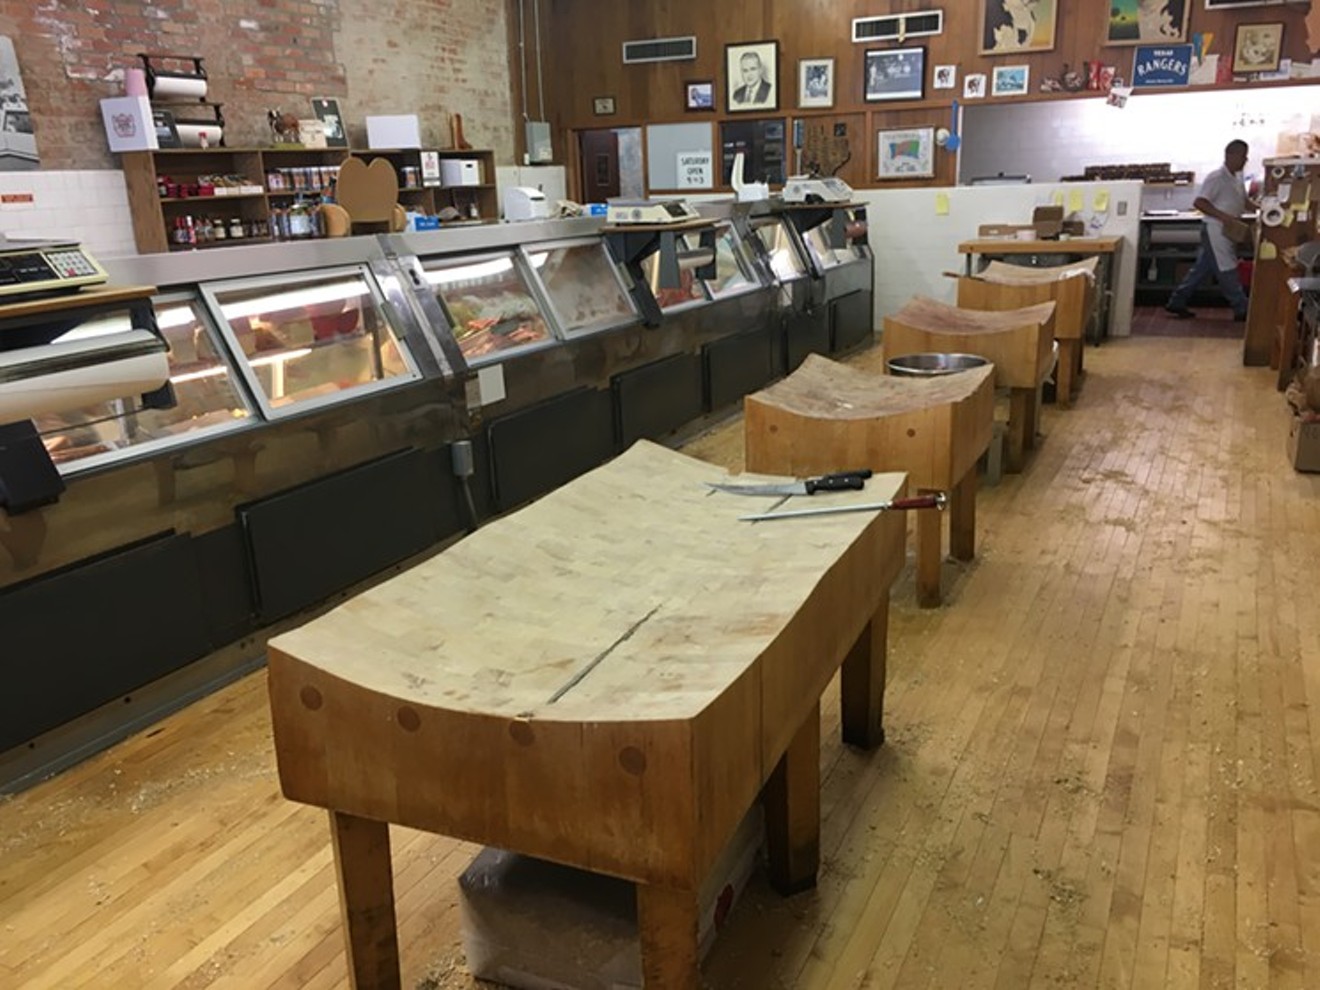 The butcher blocks are decades old, the age announced by the depth of their concave shape, at Rudolph's Market & Sausage Factory.